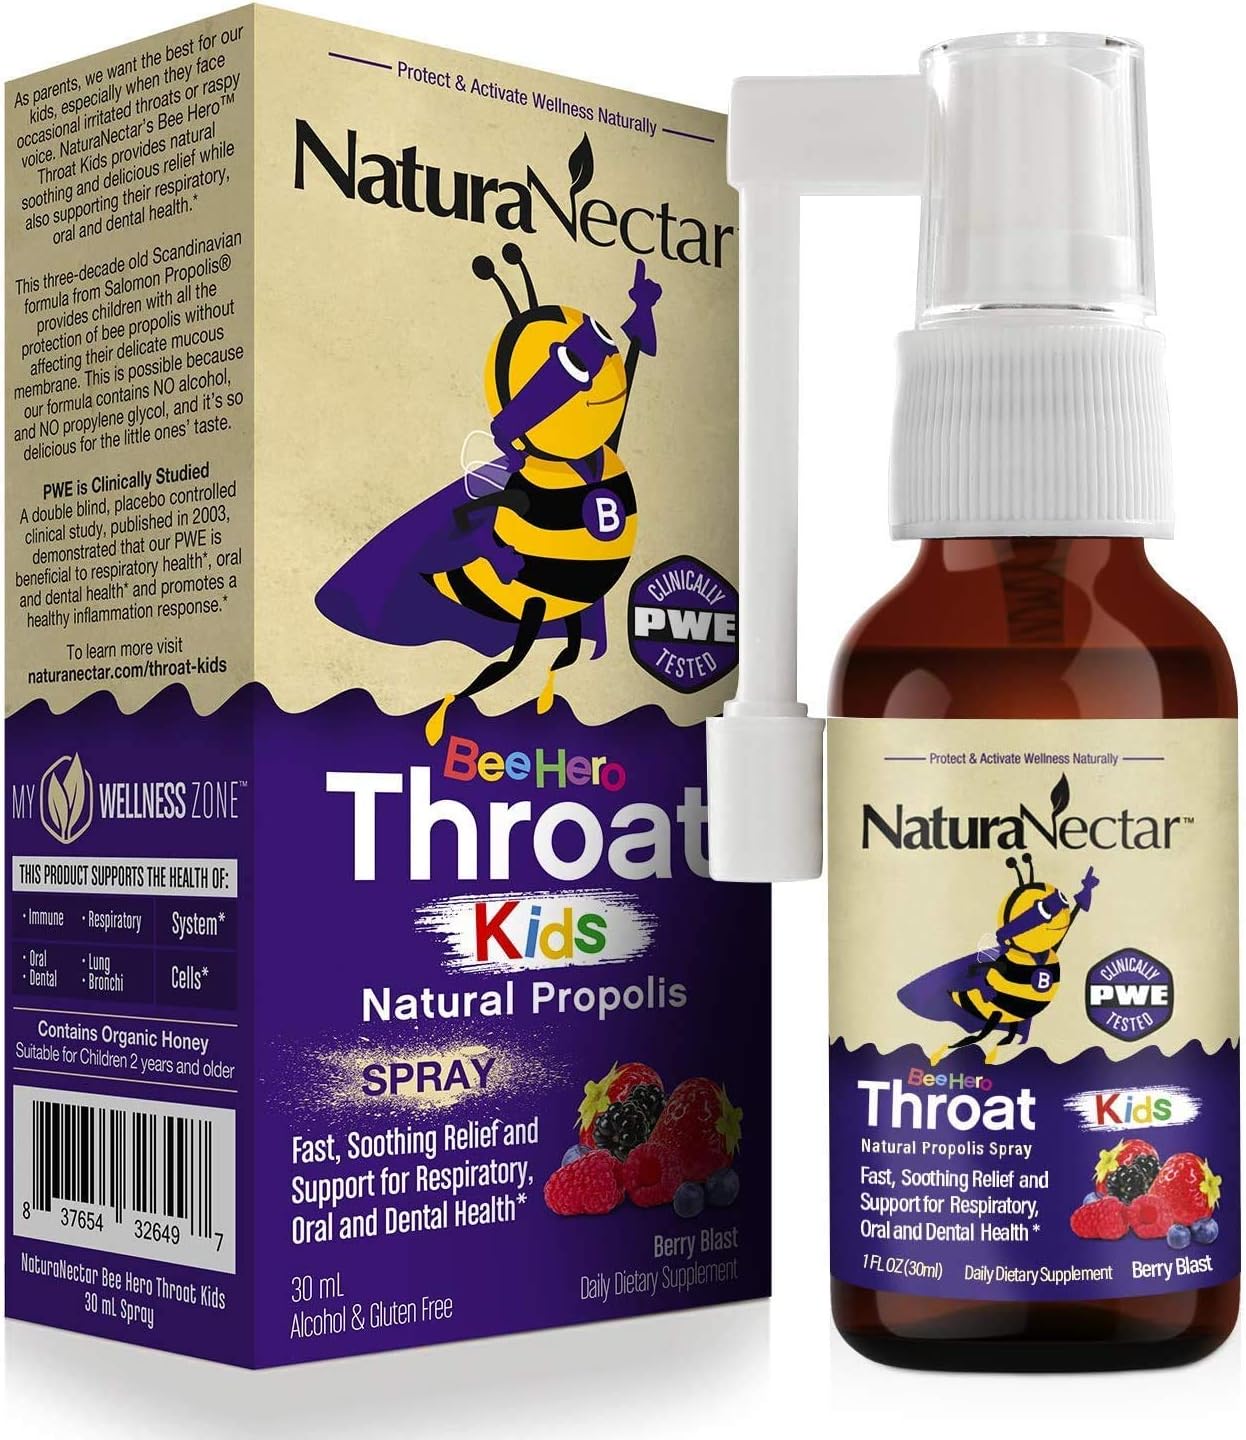 BeeHero Throat Kids Propolis Spray – Supports your kids throat health*, immune* and respiratory health*, and a daily companion for throat comfort